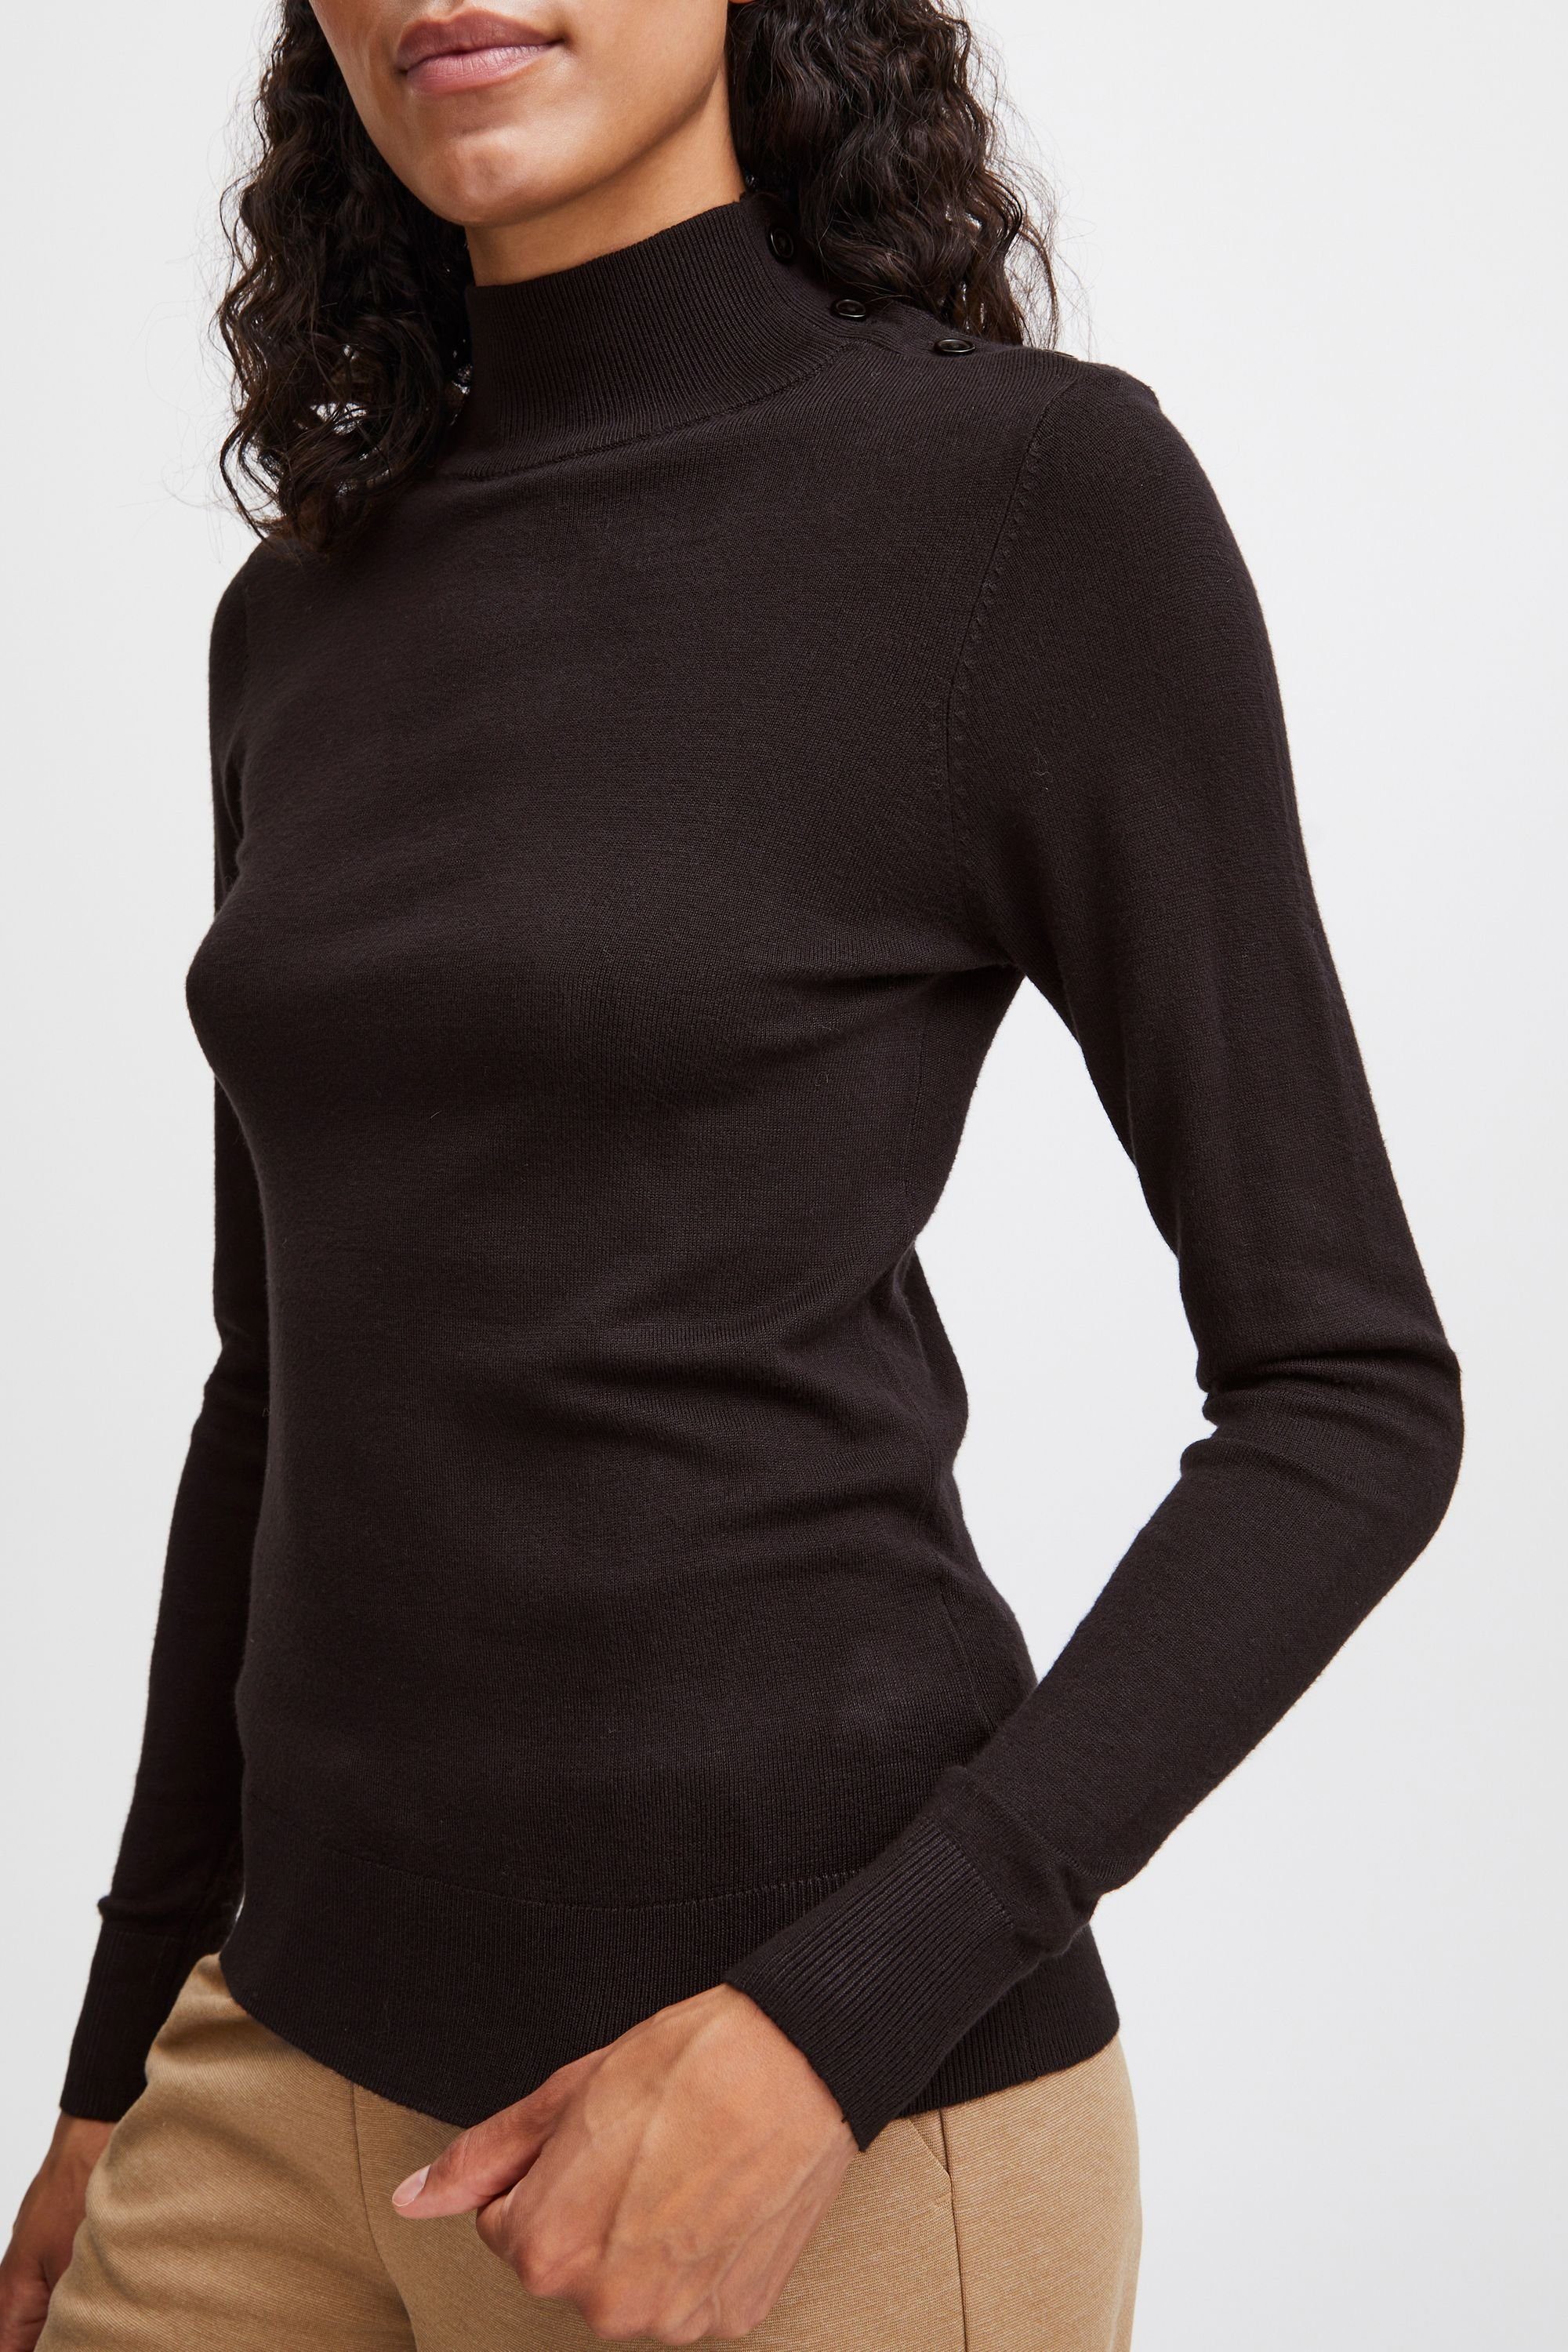 BUTTON Strickpullover (200451) Black JUMPER 20813511 b.young - BYMMPIMBA1